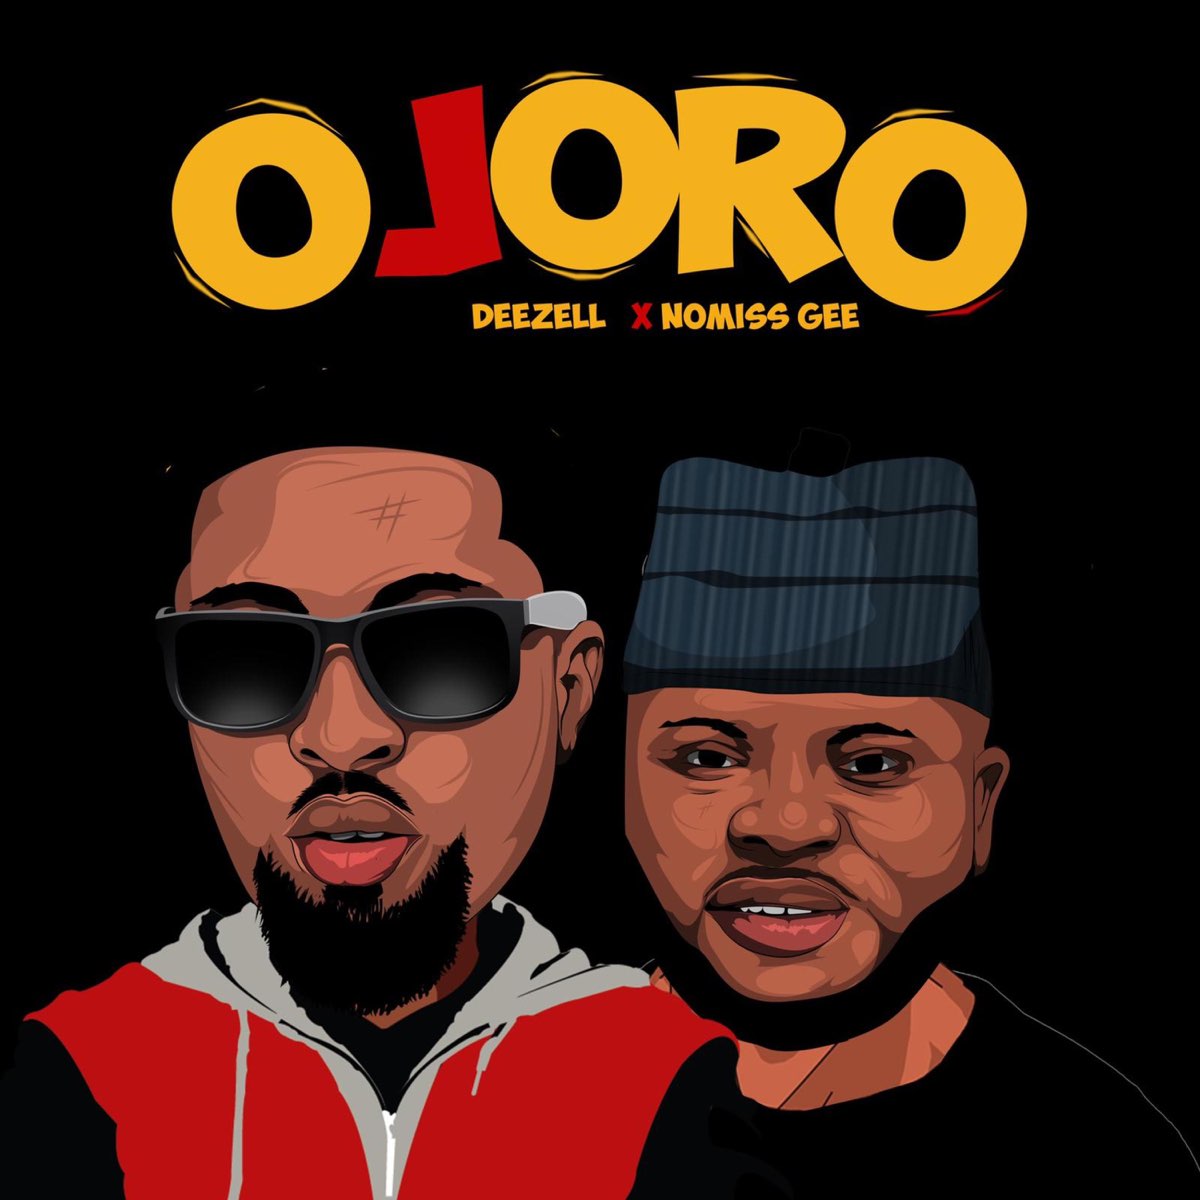 ‎Ojoro (feat. Nomis Gee) - Single by Deezell on Apple Music